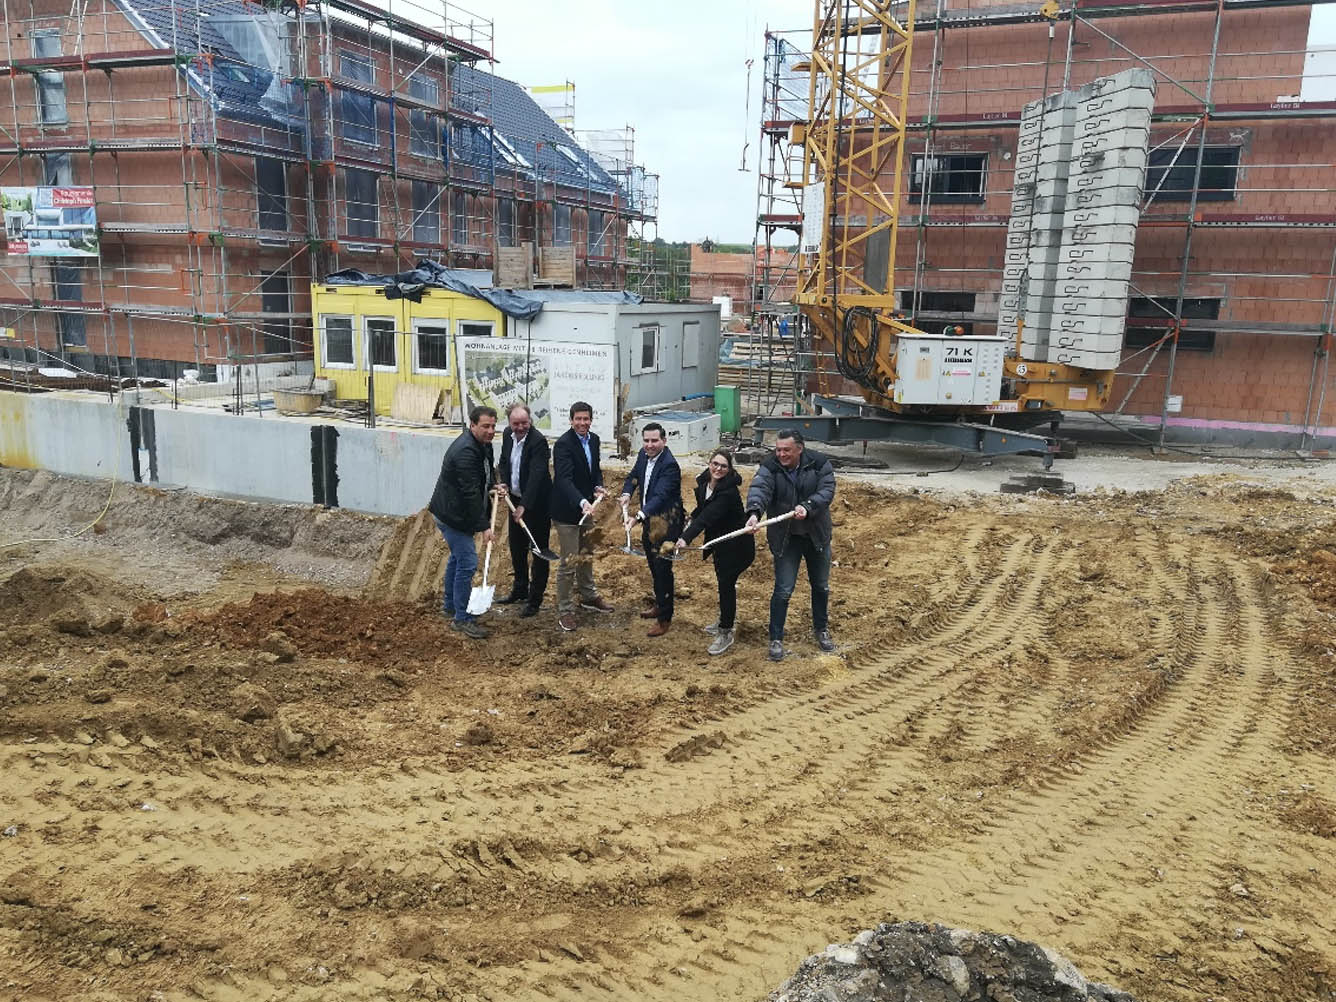 Group photo at the groundbreaking for B-Horizon’s new headquarters in Sinzing: From left to right: Armin Zeiler (Builder), Andreas Unsicker (CEO InoTexx GmbH), Patrick Grossmann (1st Mayor of Sinzing), Mohammad Kabany (Founder and CEO B-Horizon GmbH), Kathrin Wutzlhofer (Architectural Office Heitzer), Marcel Hartung (Employee of InoTexx GmbH)